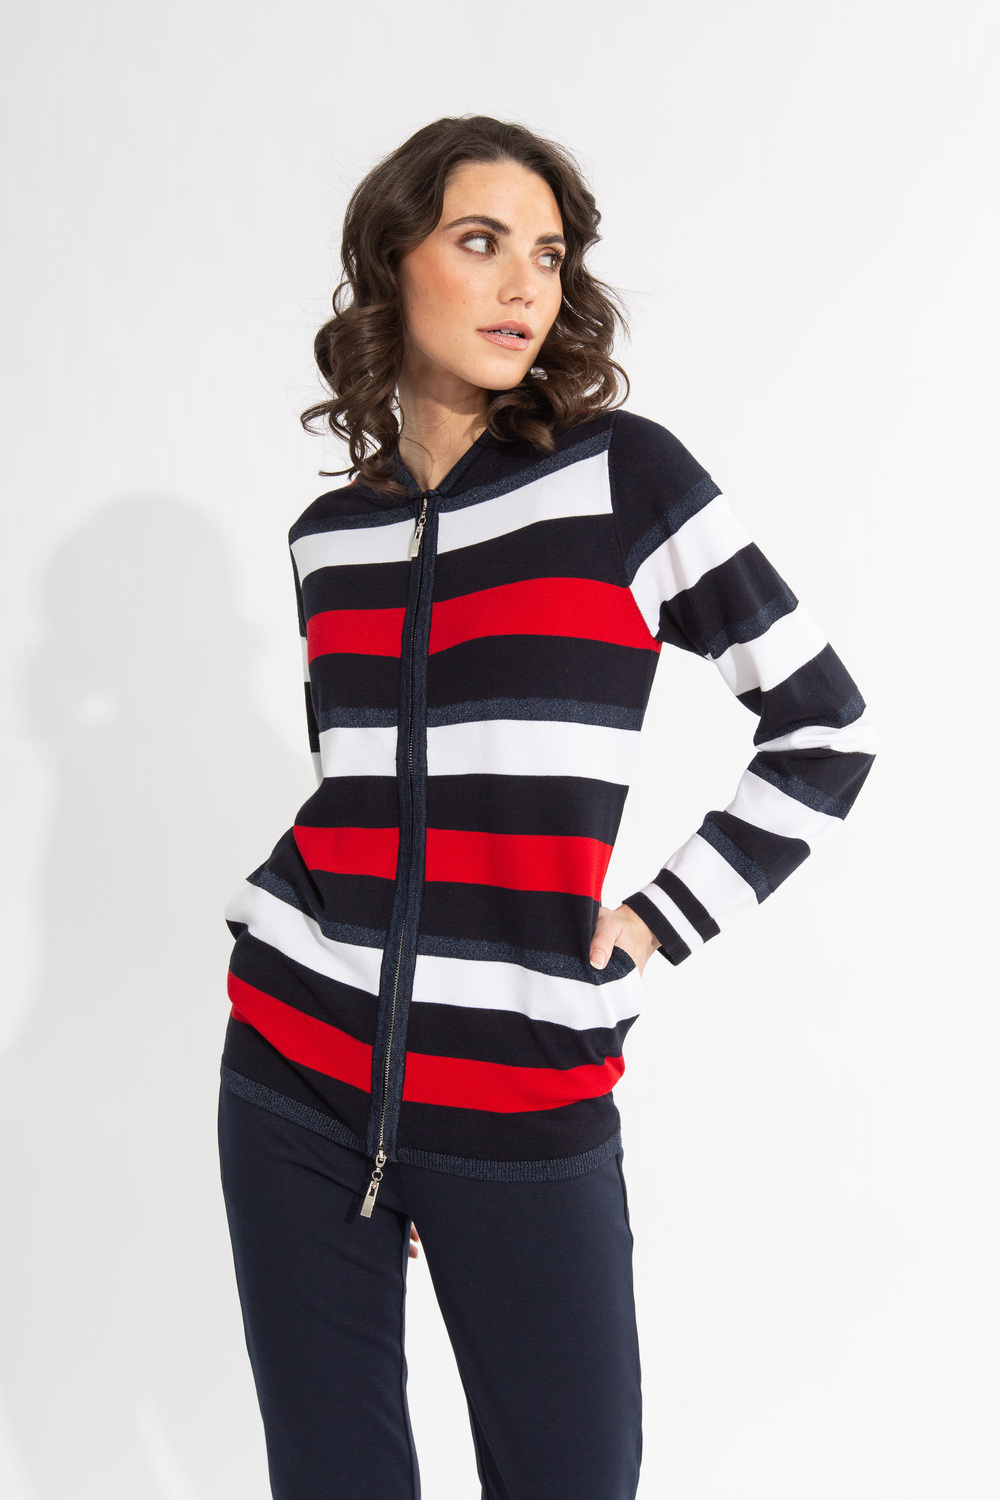 Striped Long Sleeve Top Style 605-08. As Sample